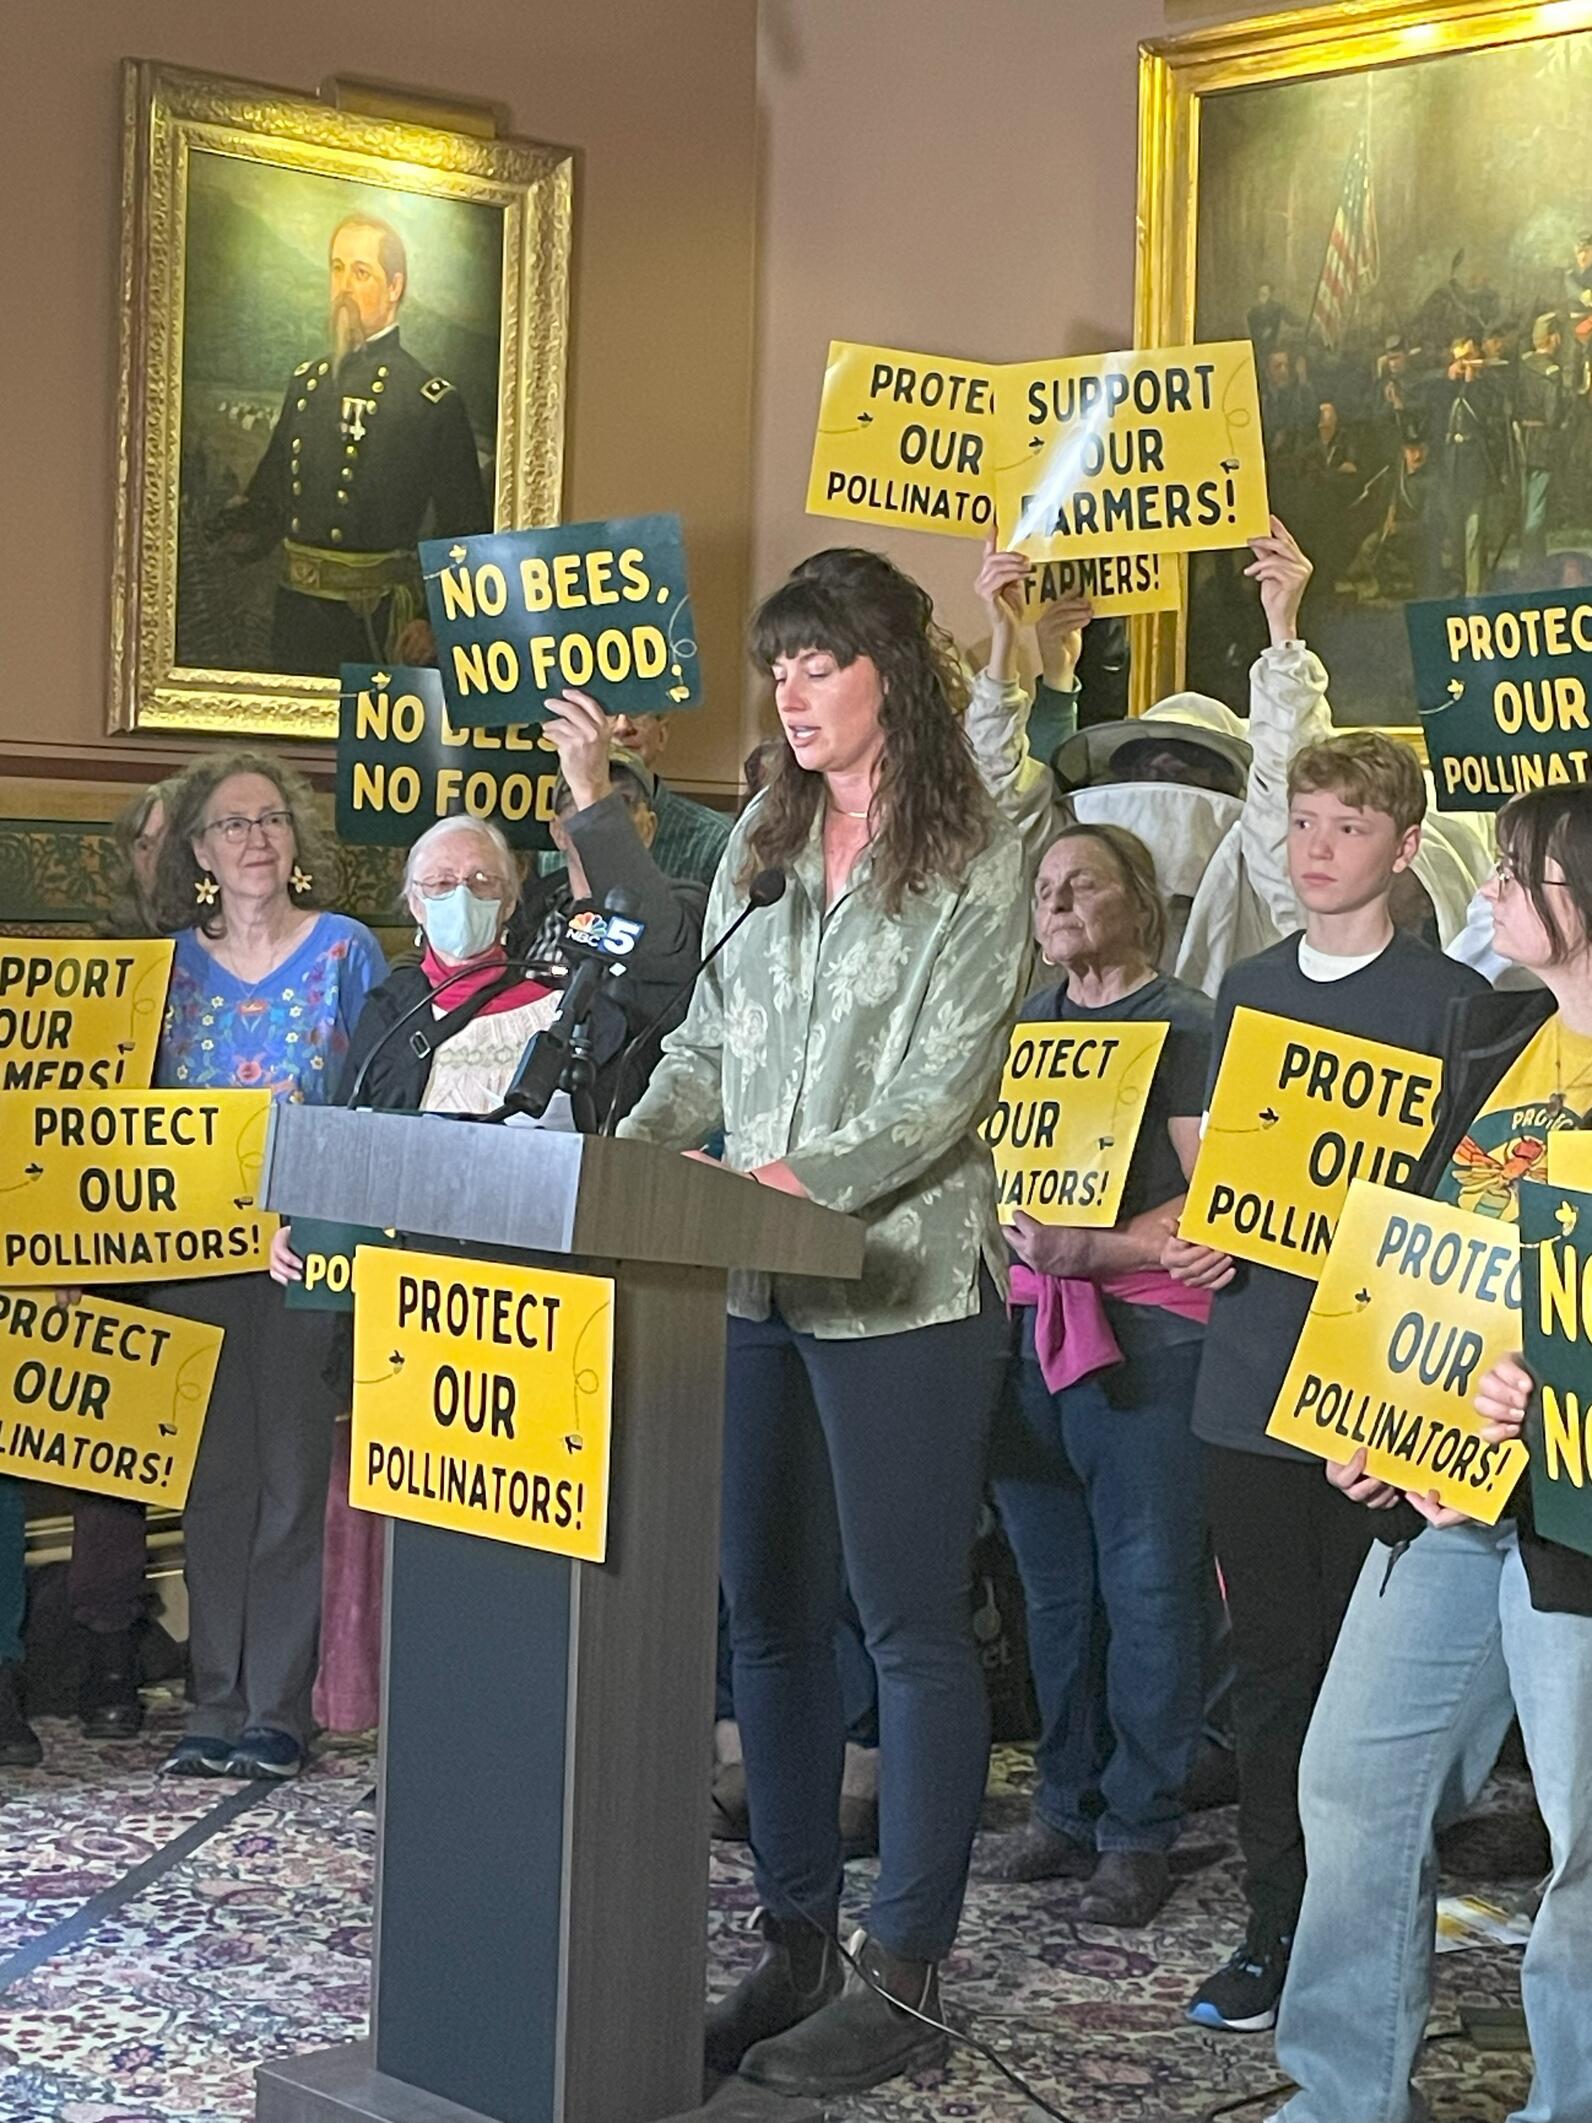 Woman standing at a podium surrounded by people with protect our pollinators signs